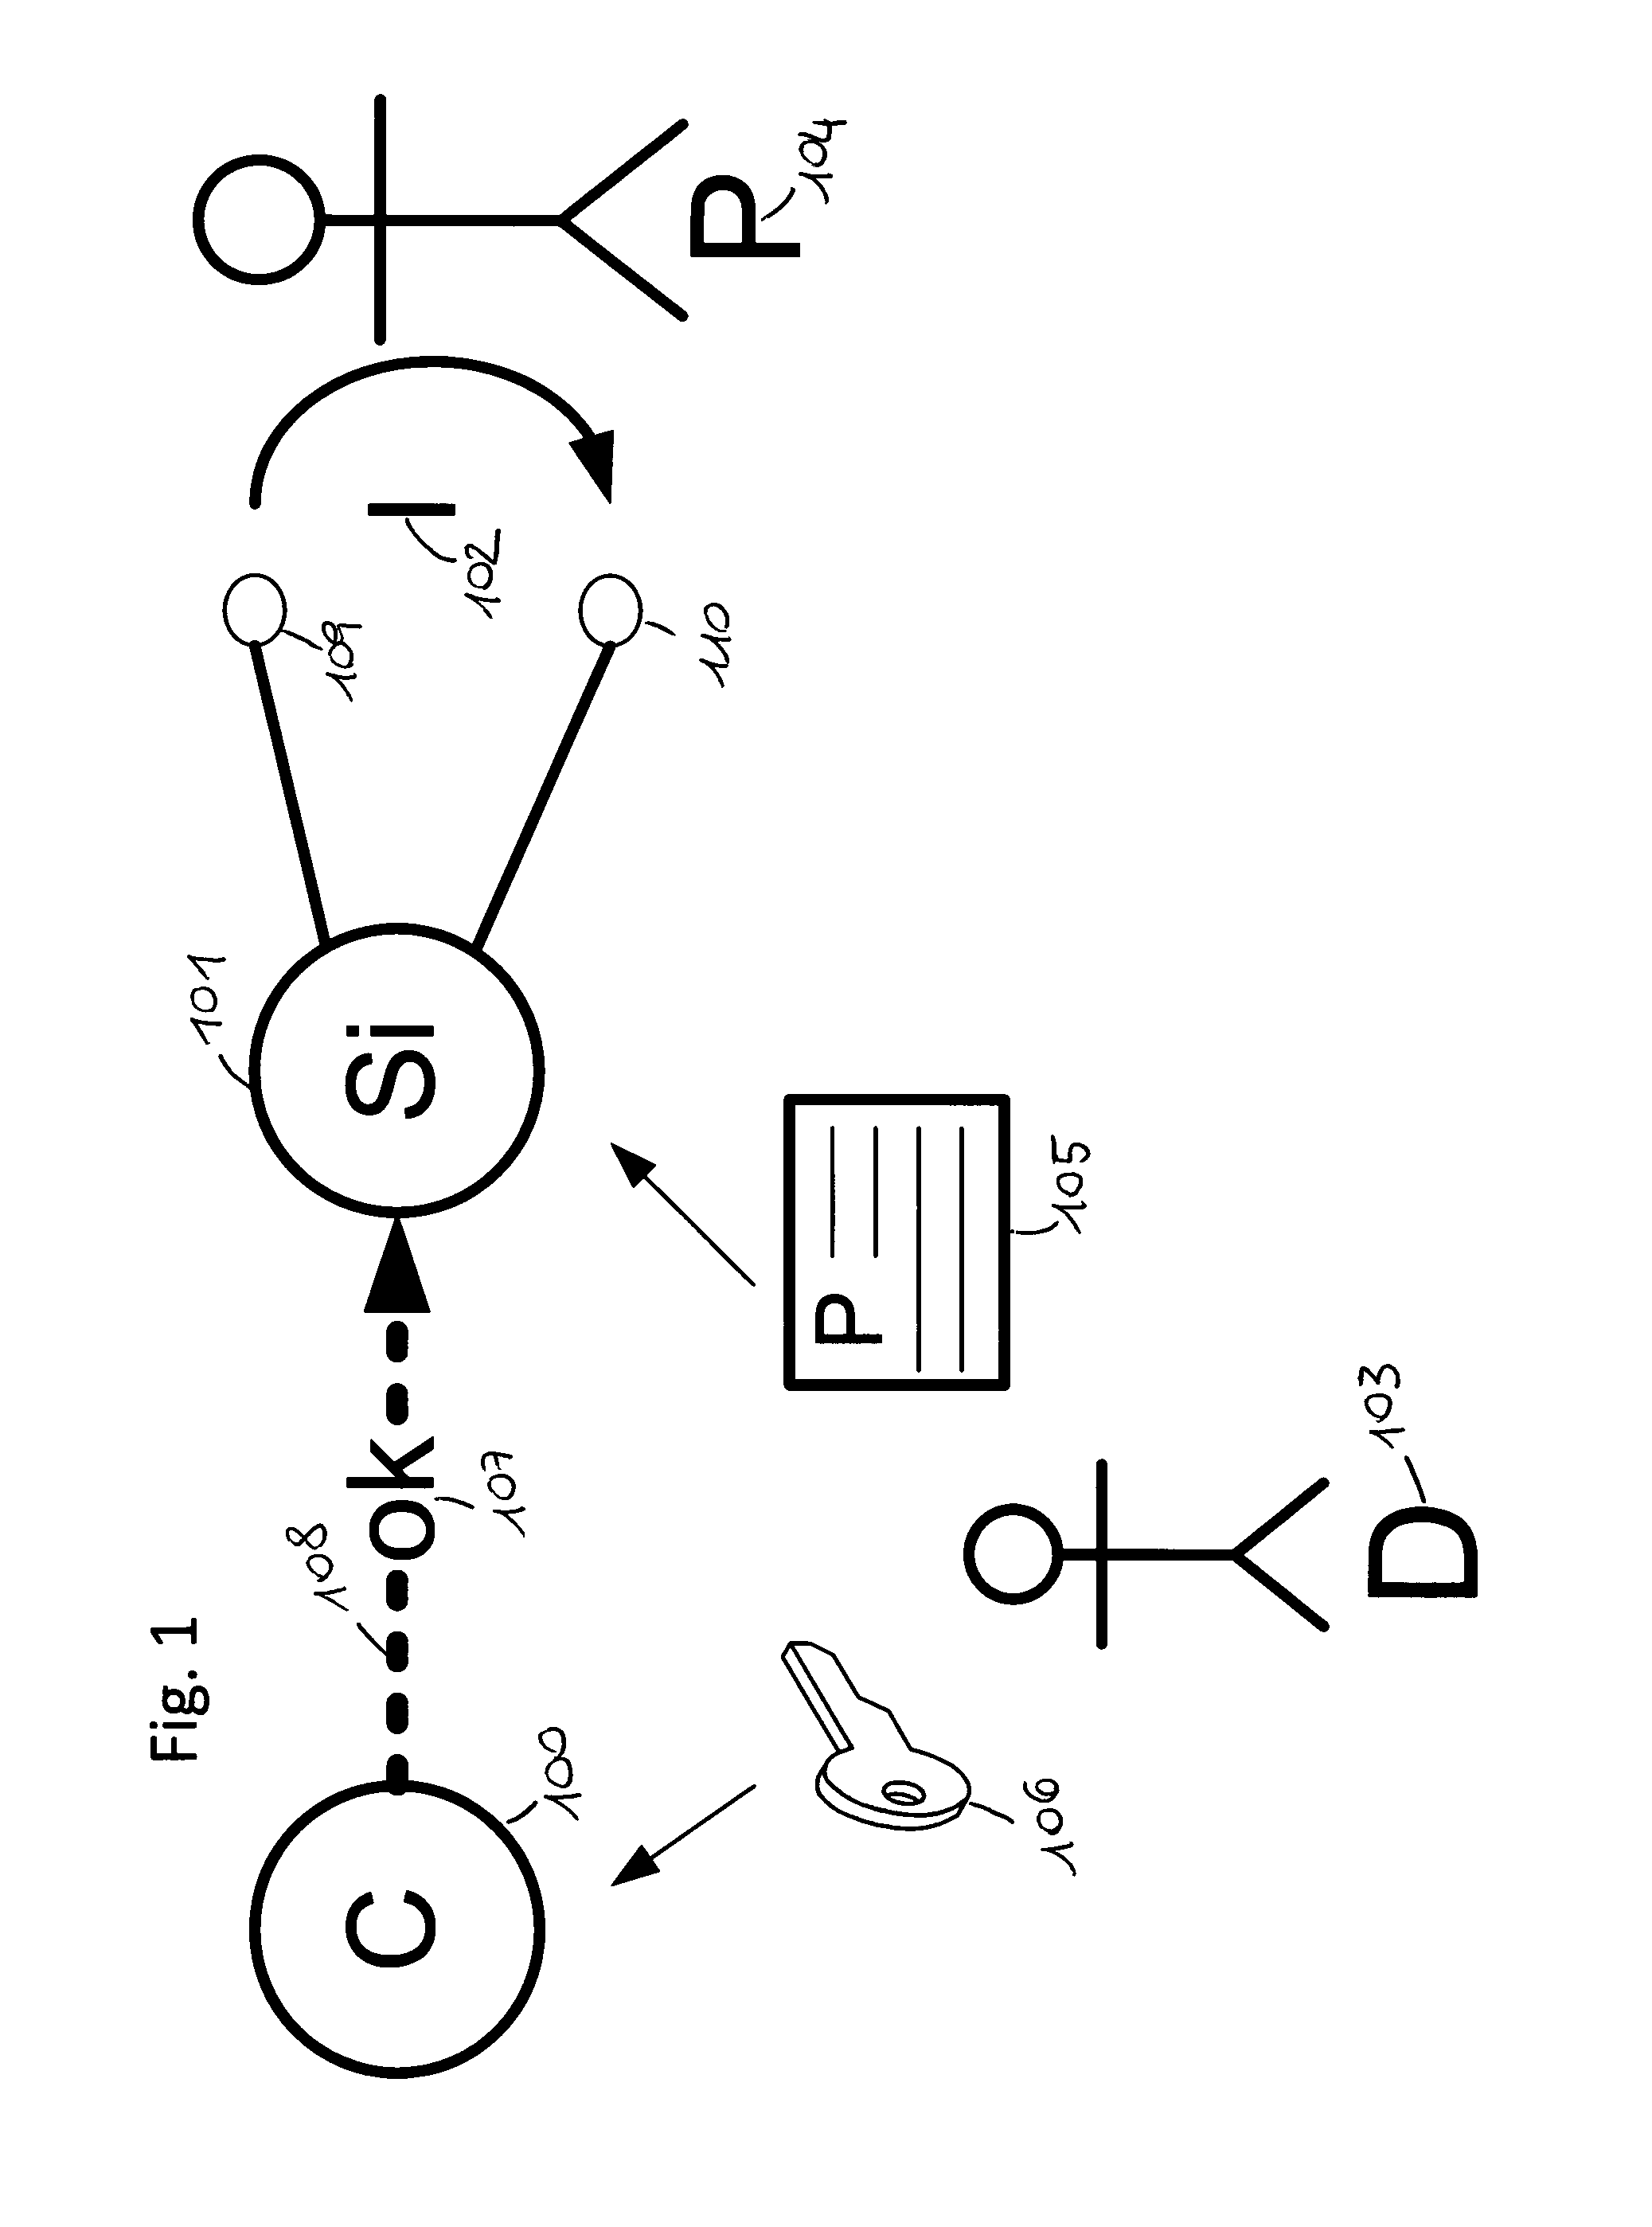 Apparatus for the controlled prescription and administration of transcranial direct current stimulation treatments in humans